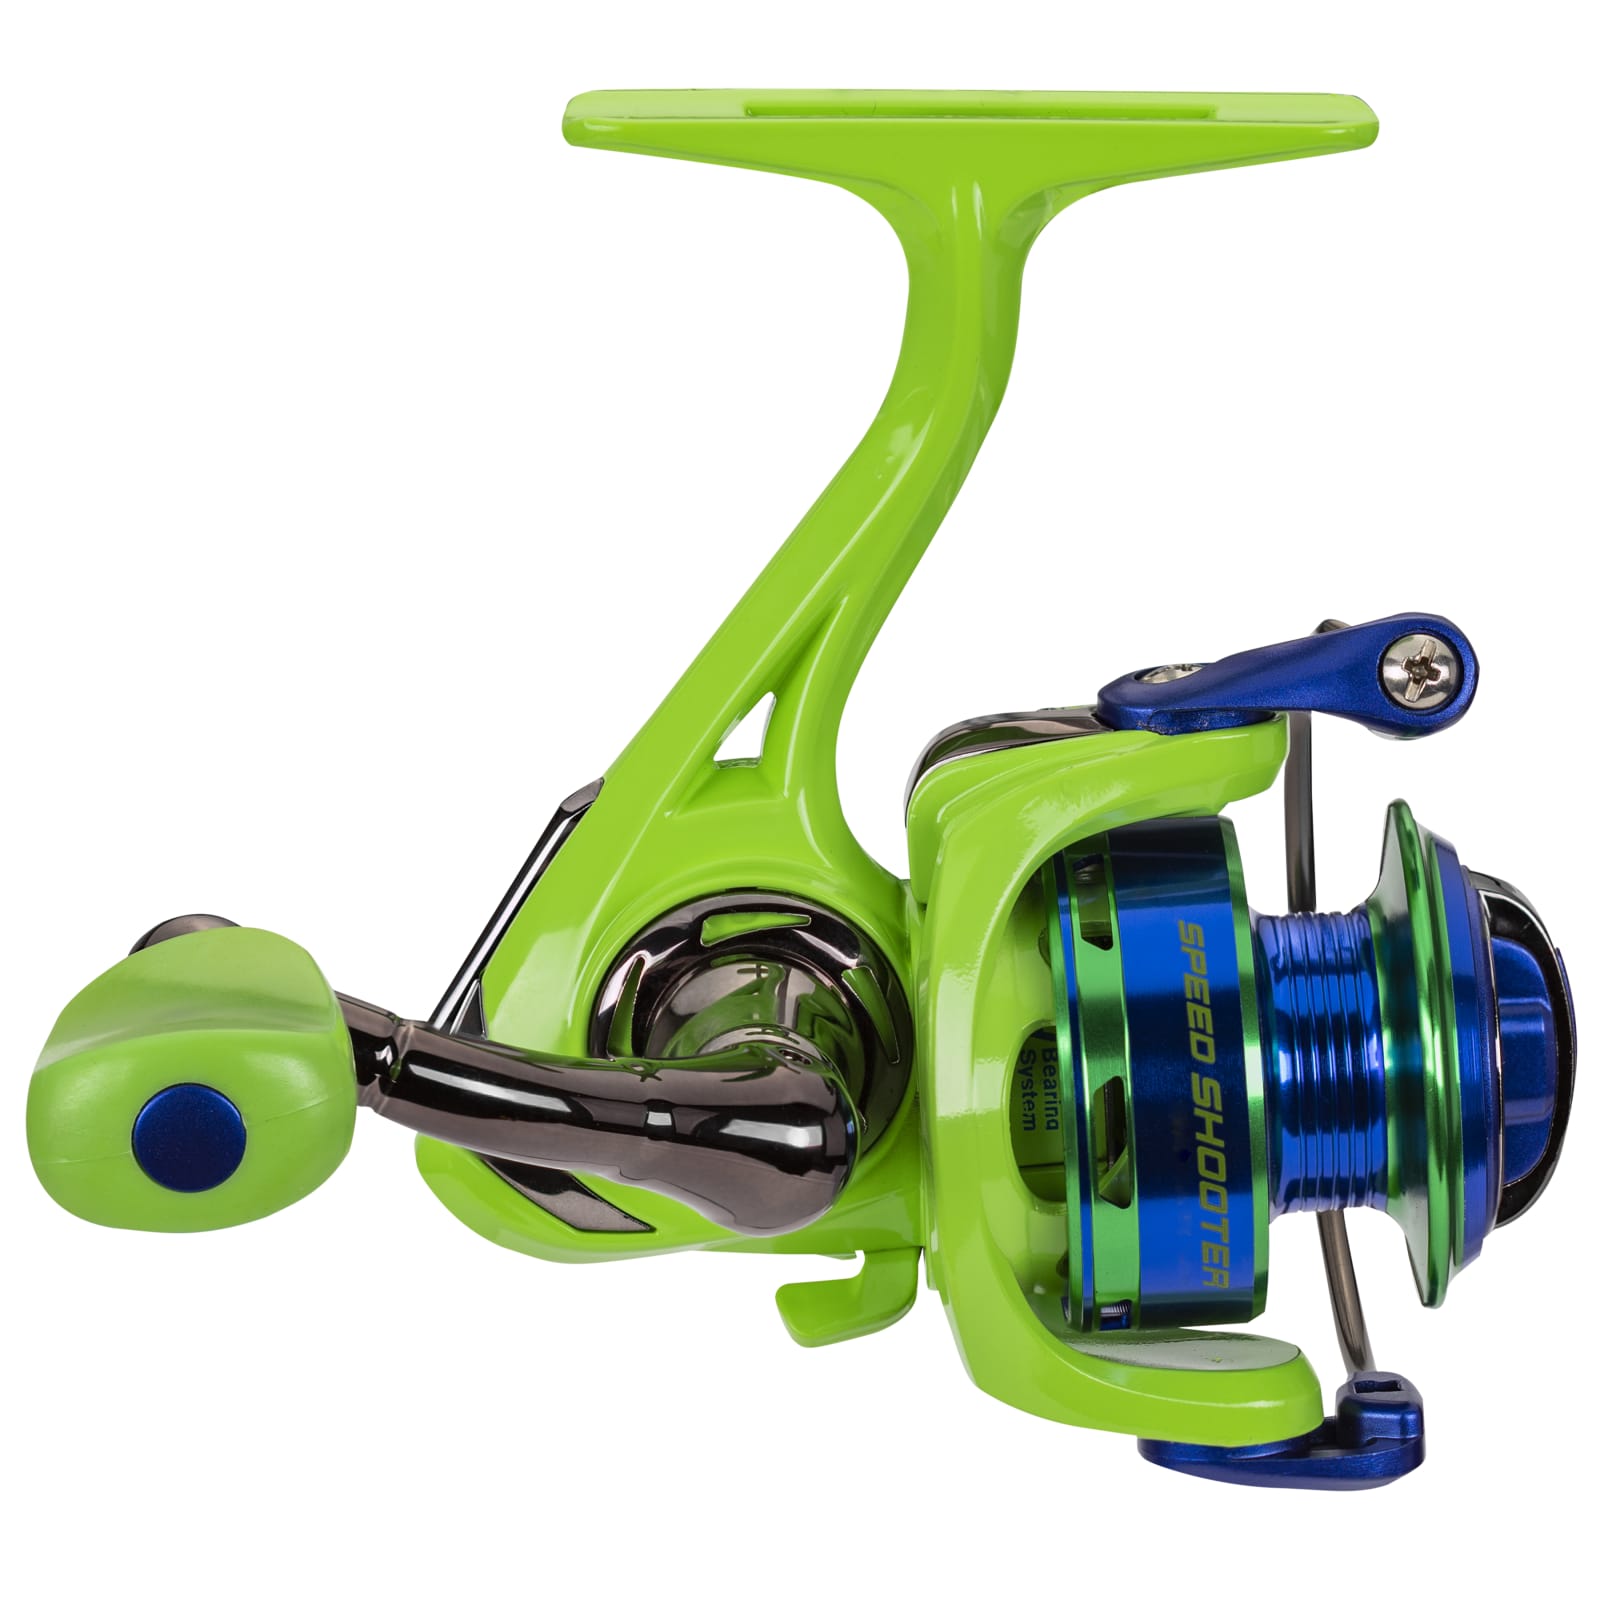 Wally Marshall Speed Shooter Series Spinning Reel by Lew's at Fleet Farm